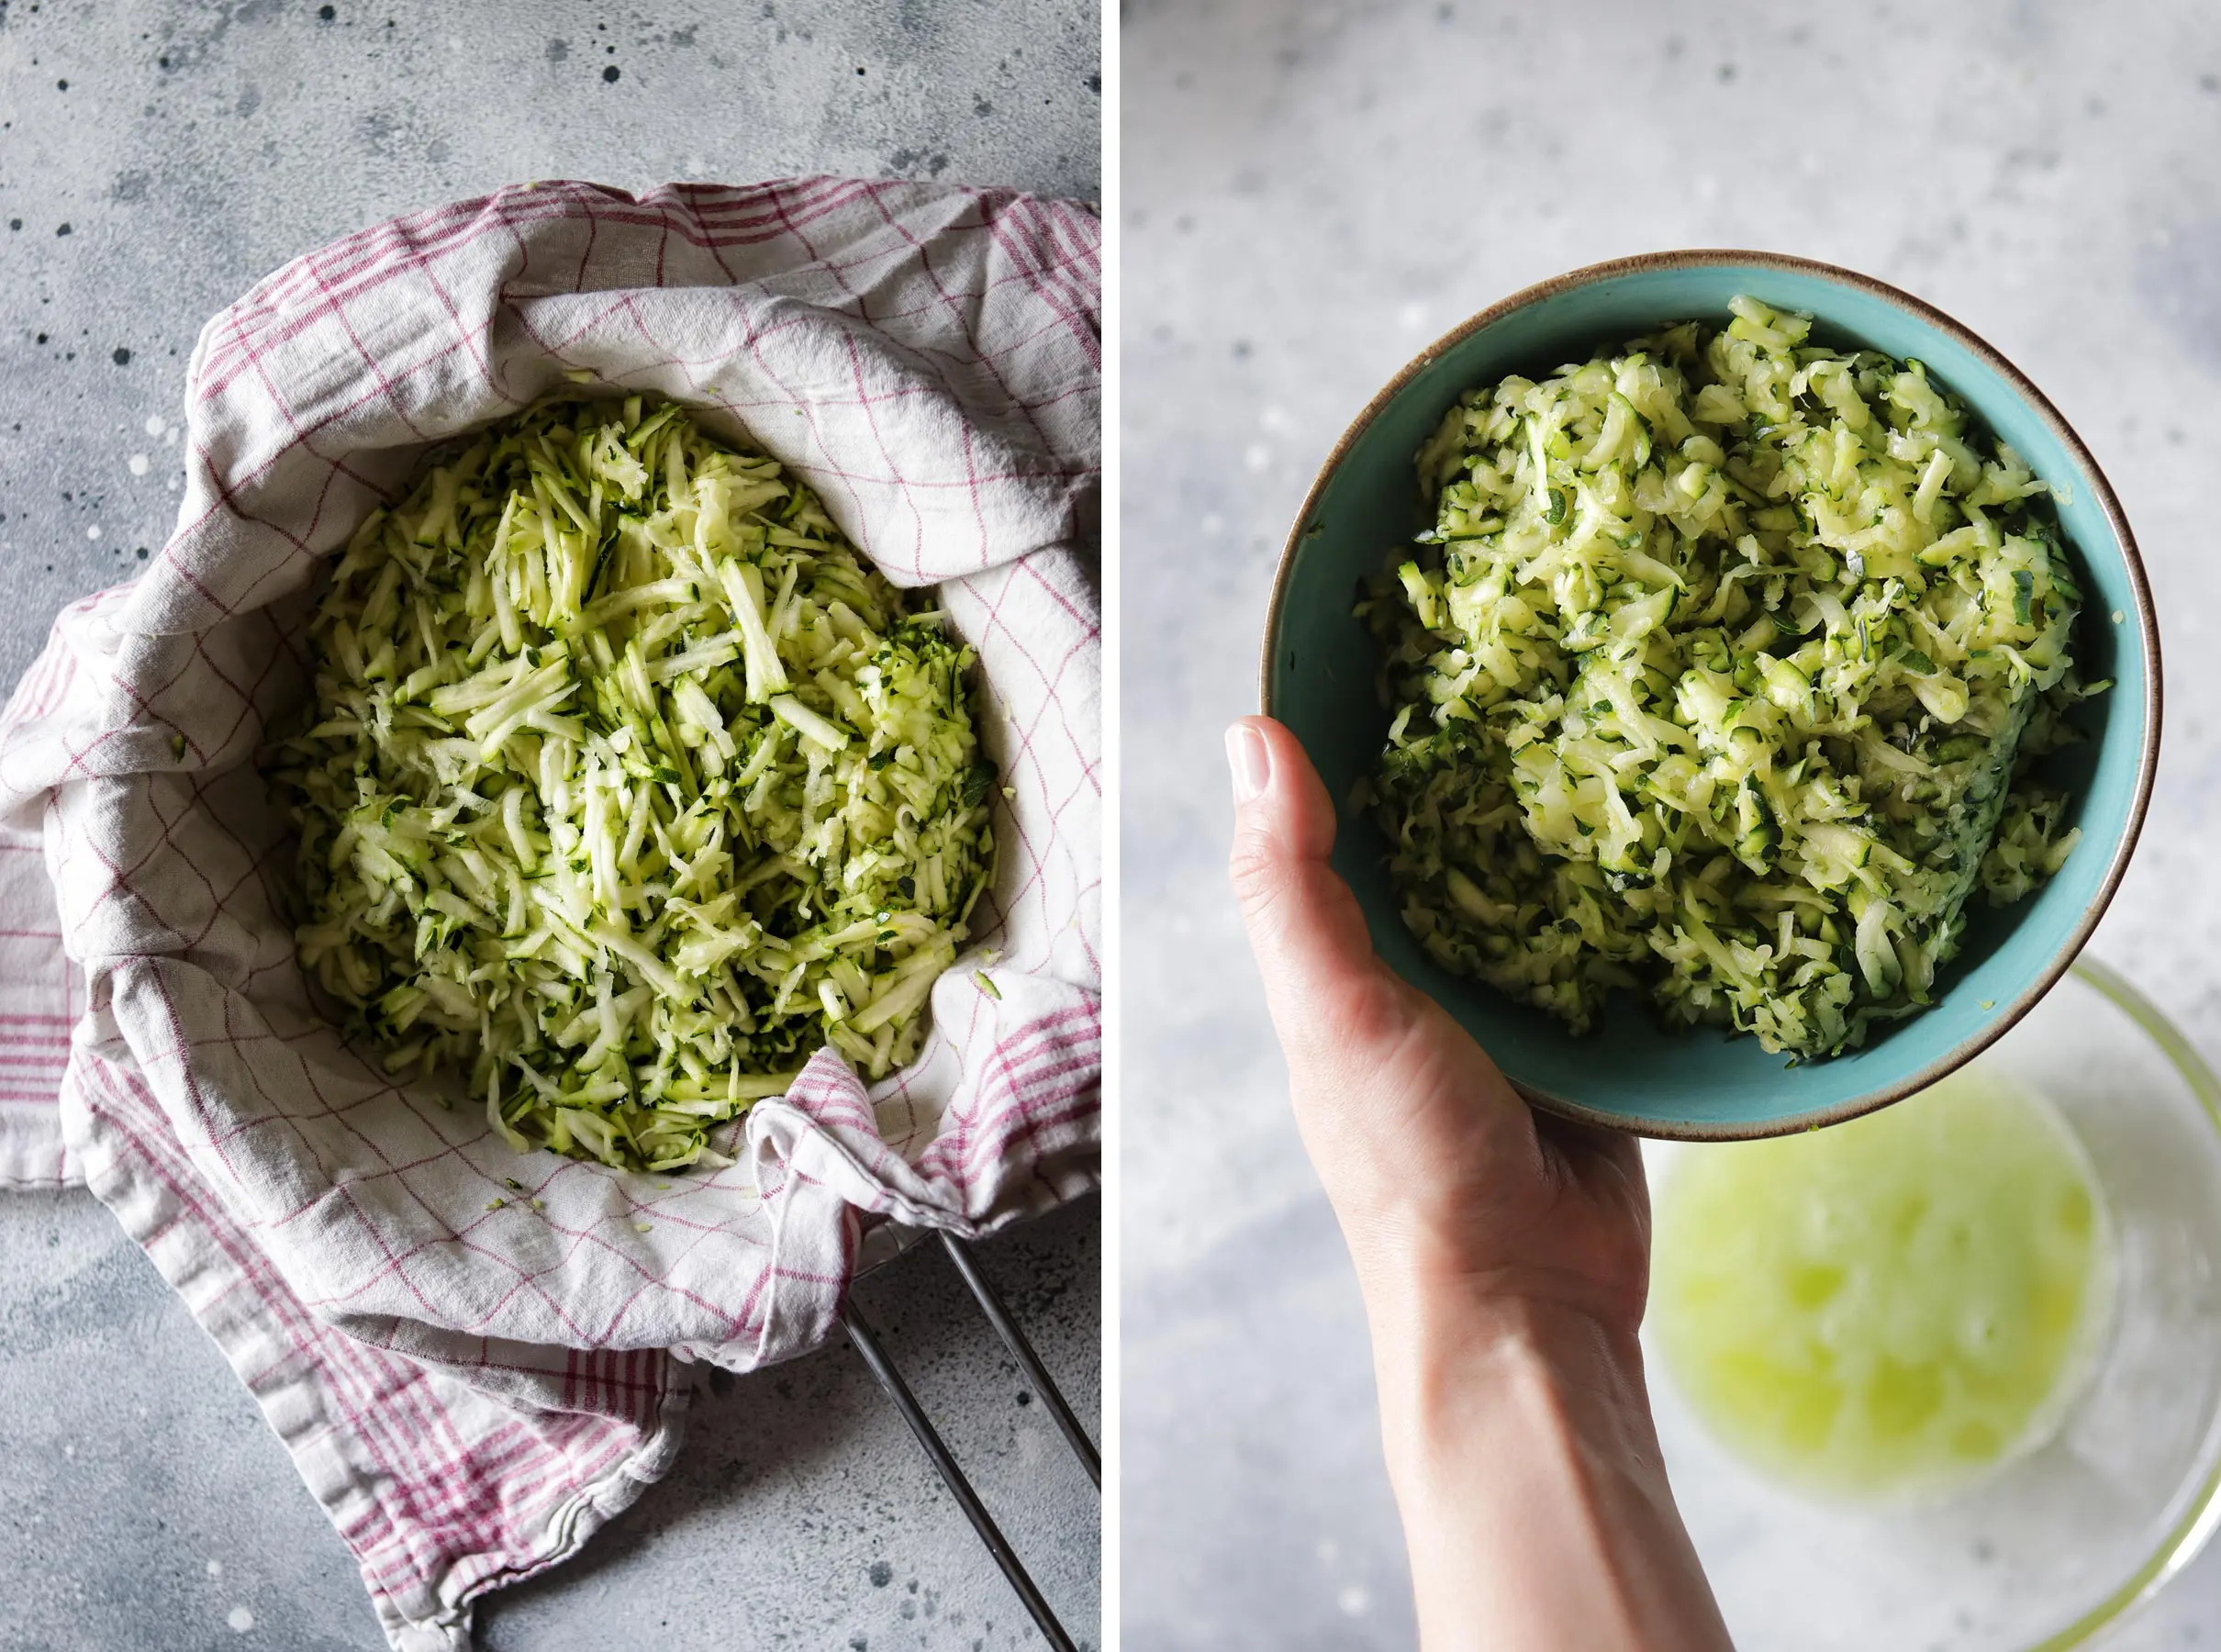 Grated Zucchini Before and After Squeezing